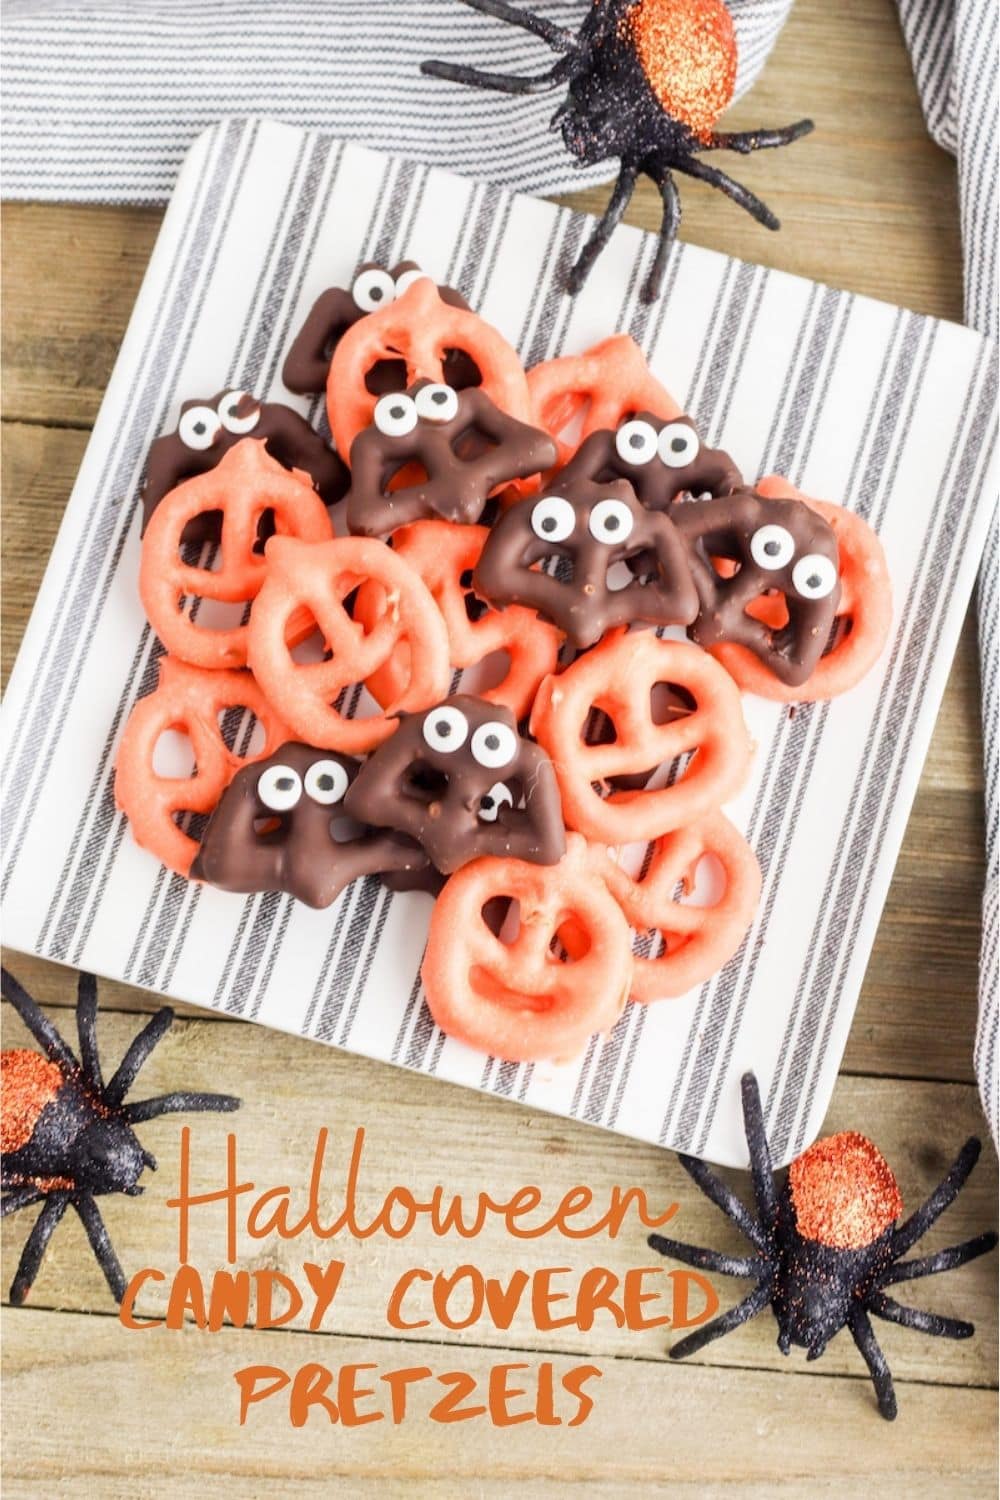 A plate of candy covered pretzels decorated for halloween.